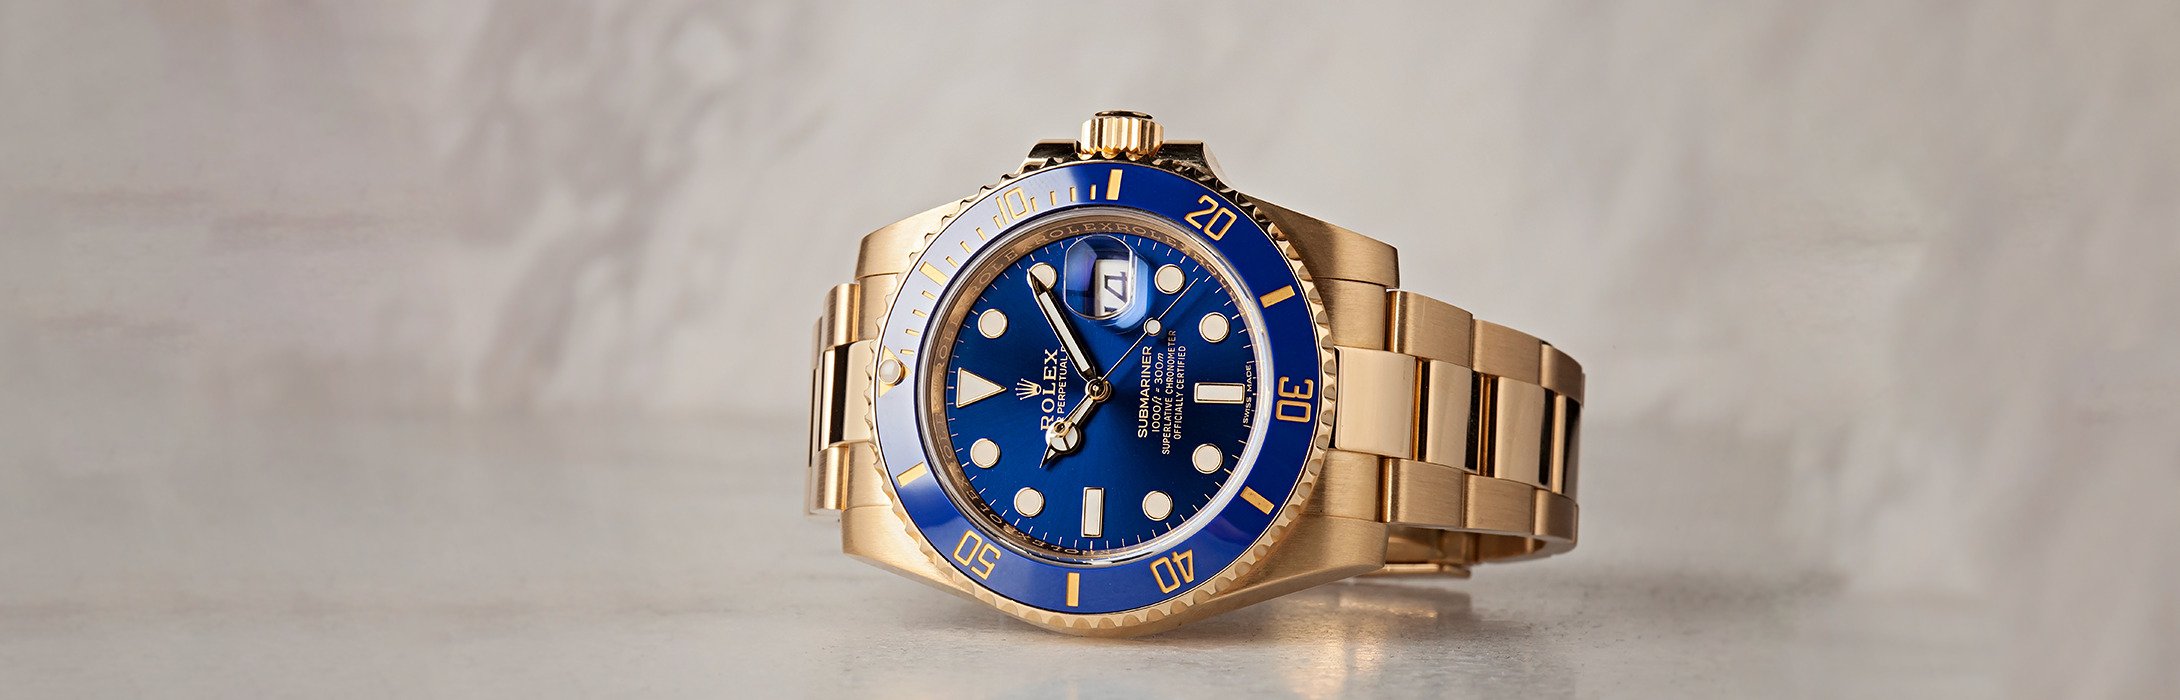 Examen album kind genert Rolex Submariner Blue Watches Review and Guide | Bob's Watches